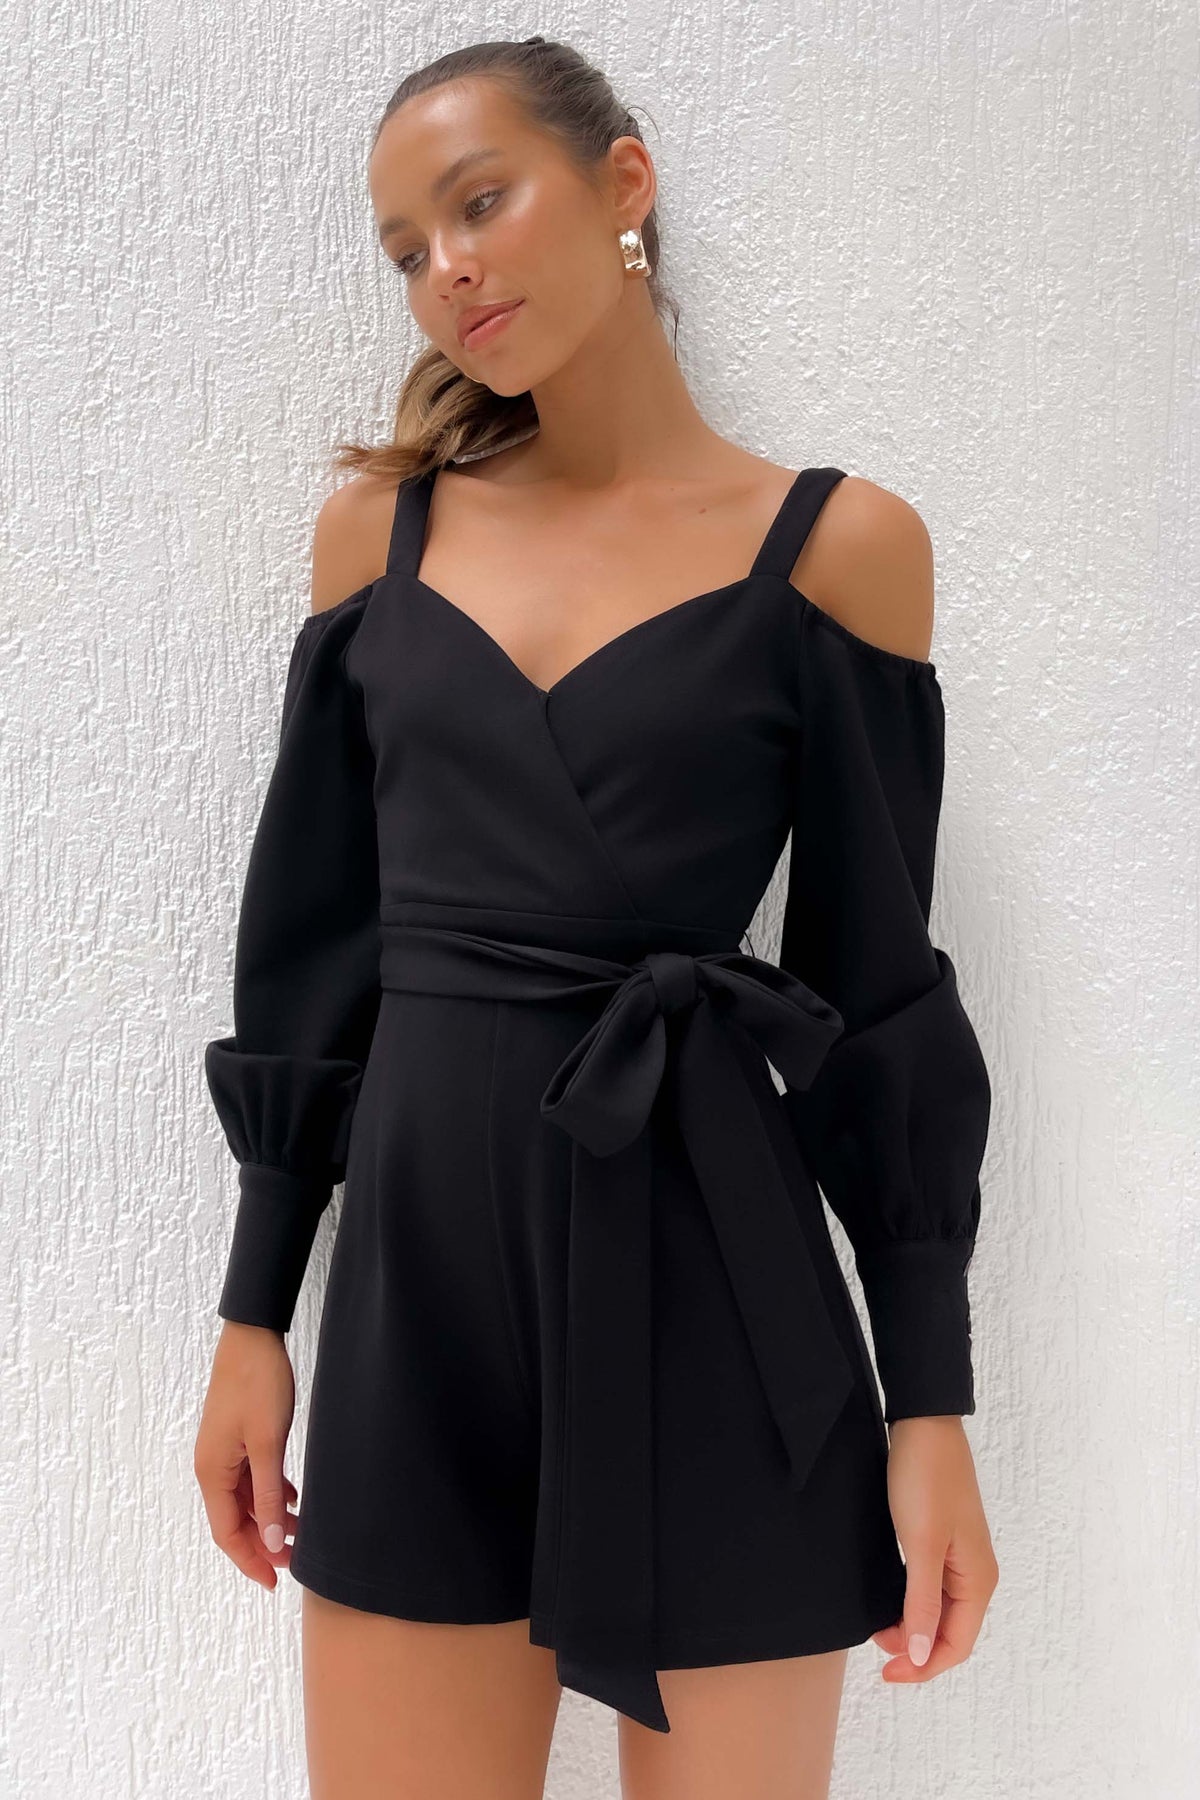 Changing Playsuit, BLACK, LONG SLEEVE, new arrivals, PLAYSUIT, PLAYSUITS, SPANDEX &amp; NYLON &amp; RAYON, SPANDEX AND NYLON AND RAYON, , -MISHKAH